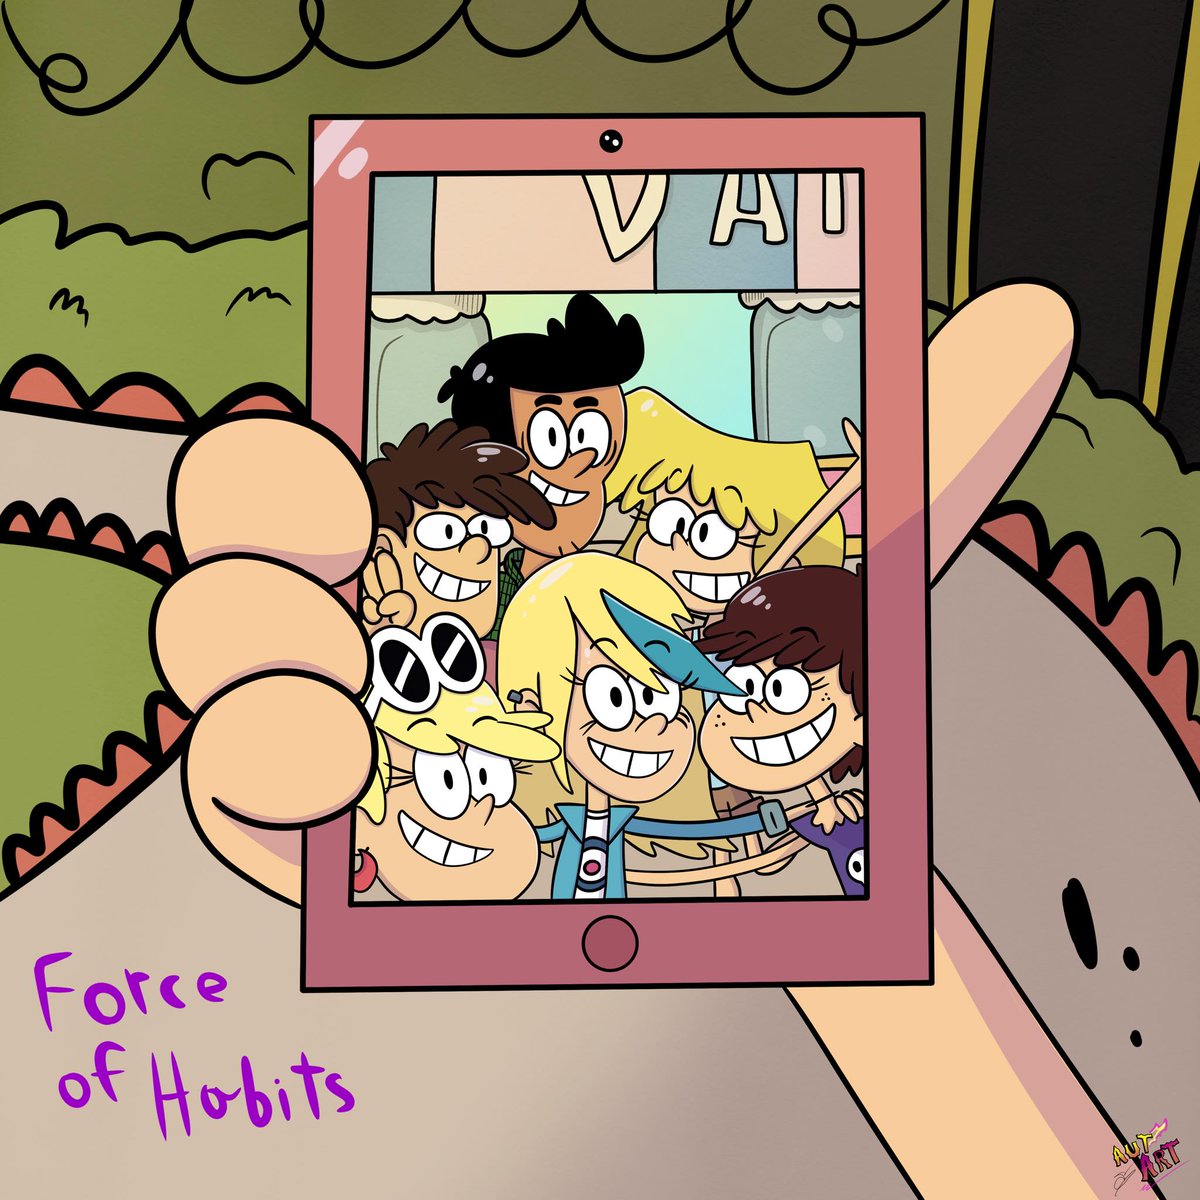 Leni-Let's take a picture 📱✨
Force of habits is an episode that I think is great and I love it.^⁠_⁠^
#TheLoudHouse #TheLoudHousefanart #LoriLoud #lori_loud #LeniLoud  #leni_loud
#lunaloud #luna_loud #samsharp #sam_sharp